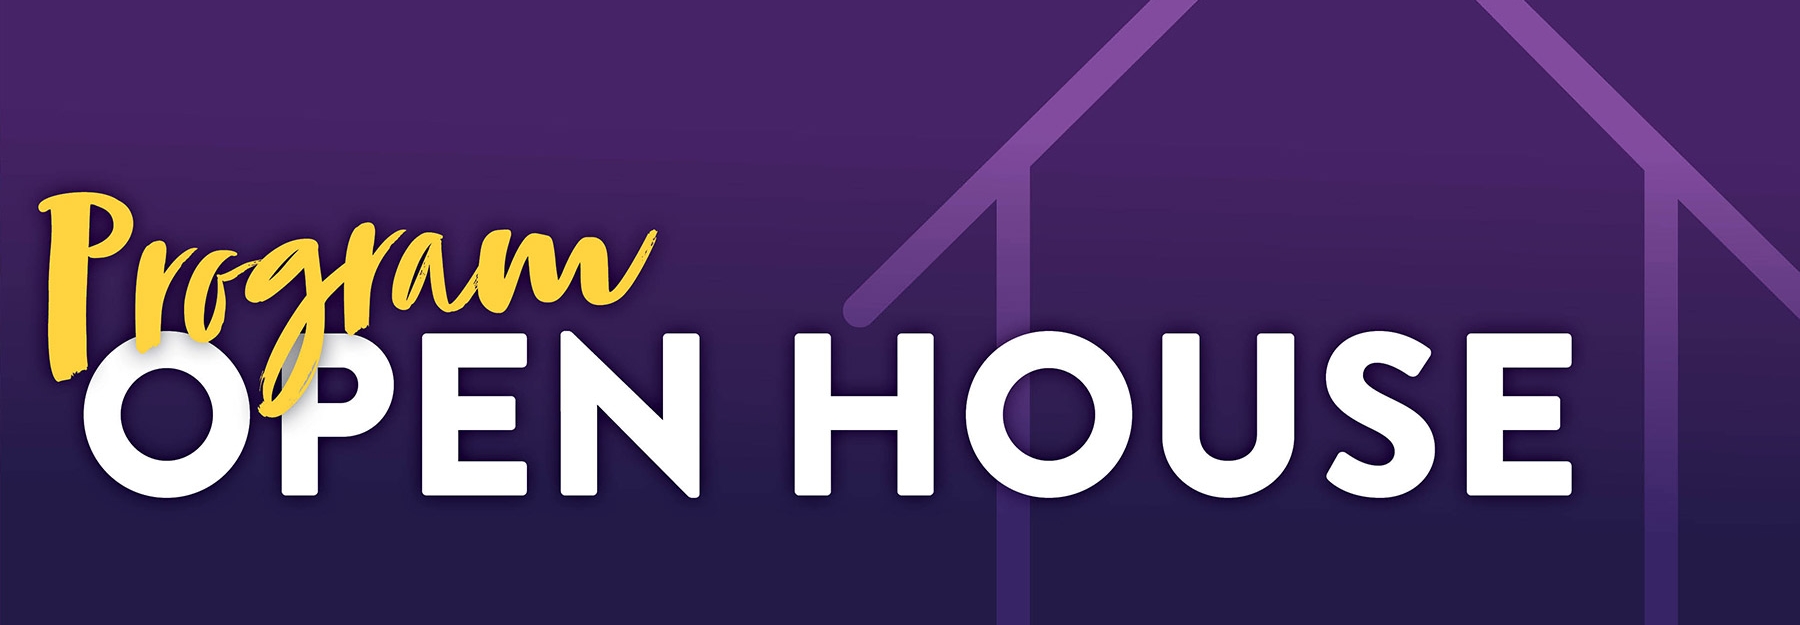 Program Open House. White and yellow text on purple background with the outline of a house.